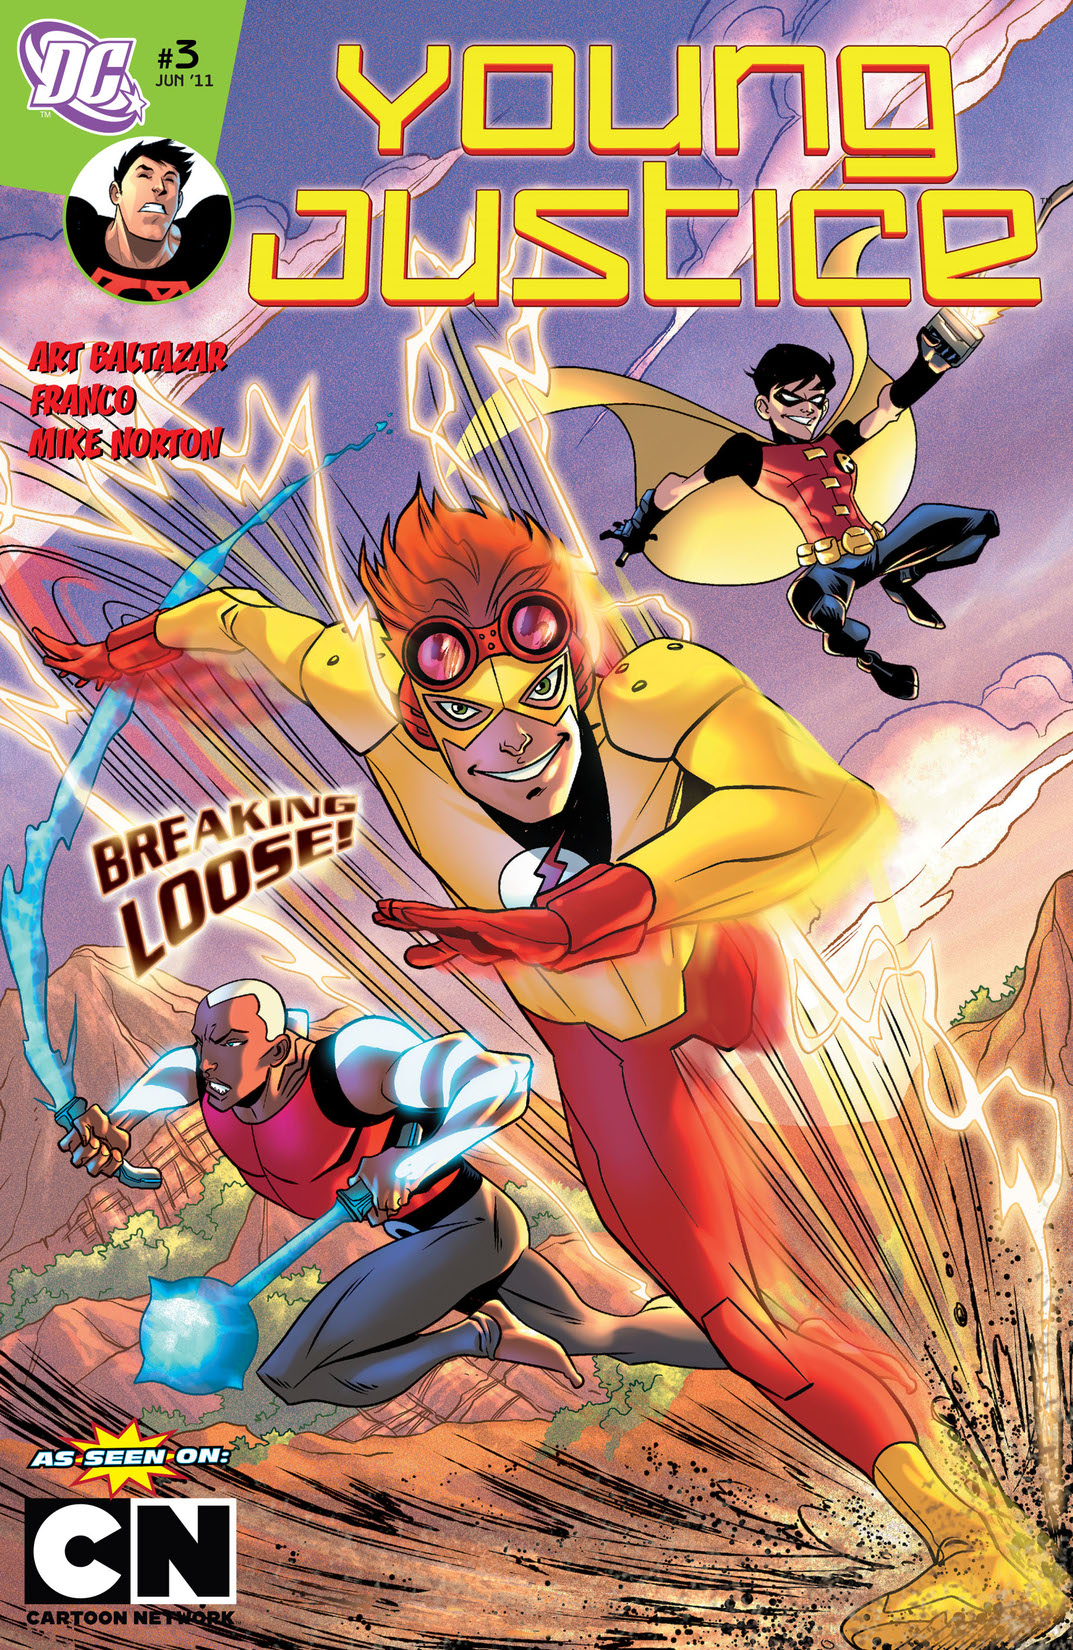 Young Justice (2011-) #3 preview images